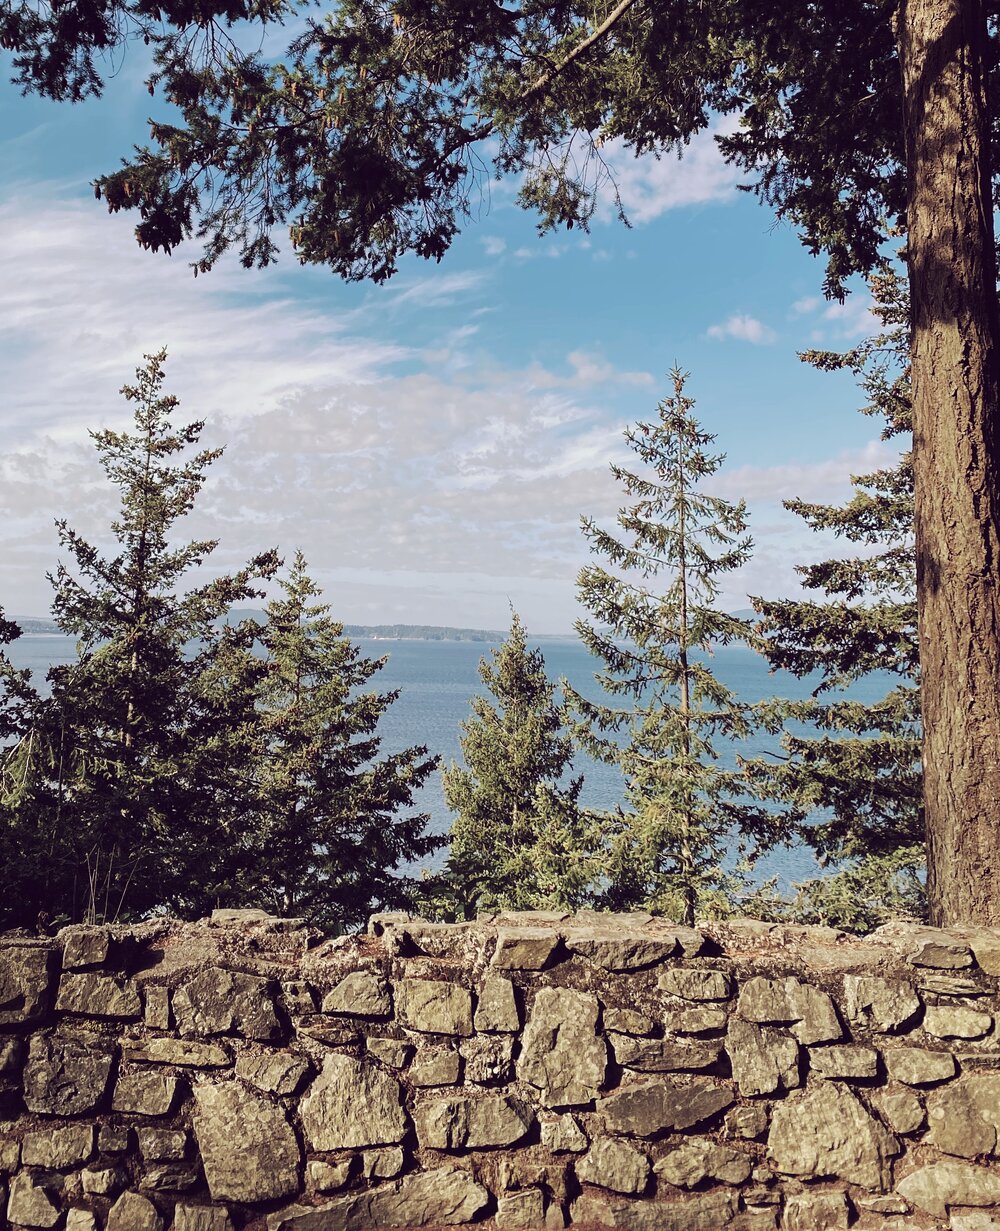 Viewpoint on the famous Chuckanut Drive in Washington State 